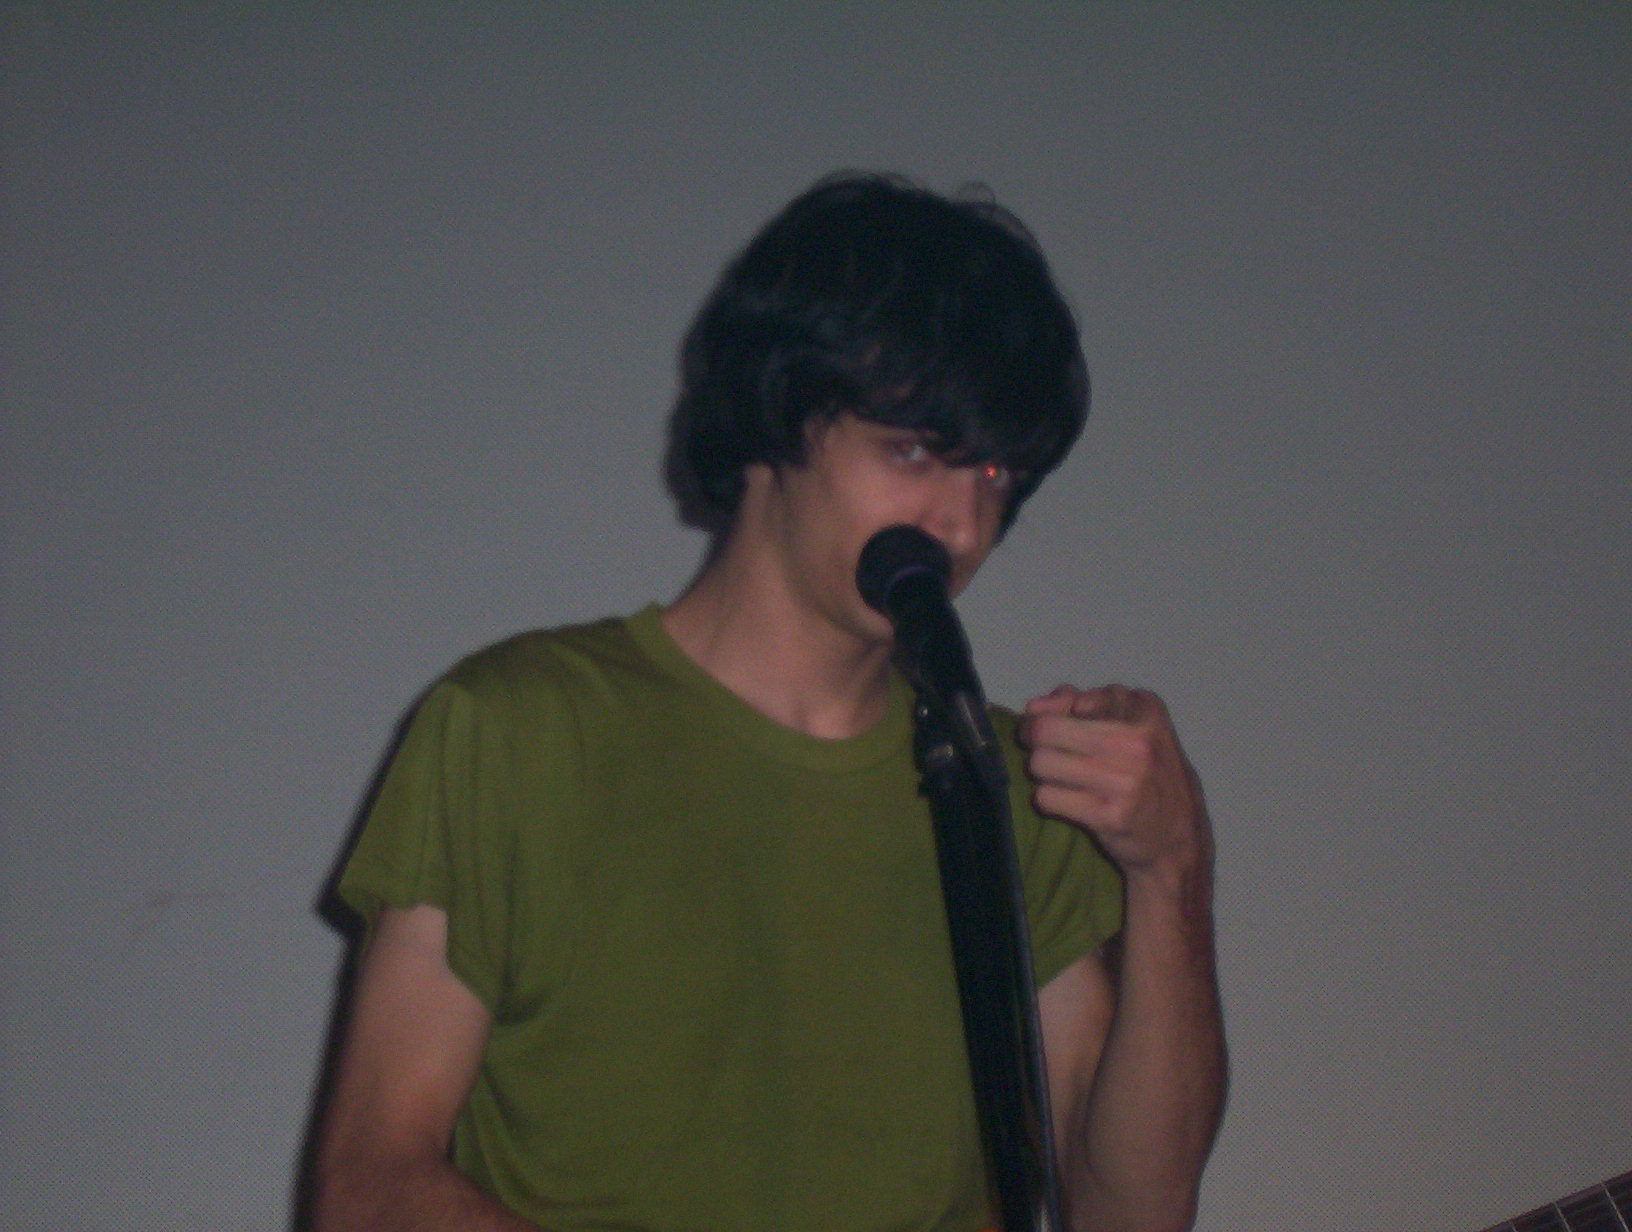 boy singing into a microphone and holding an electric guitar